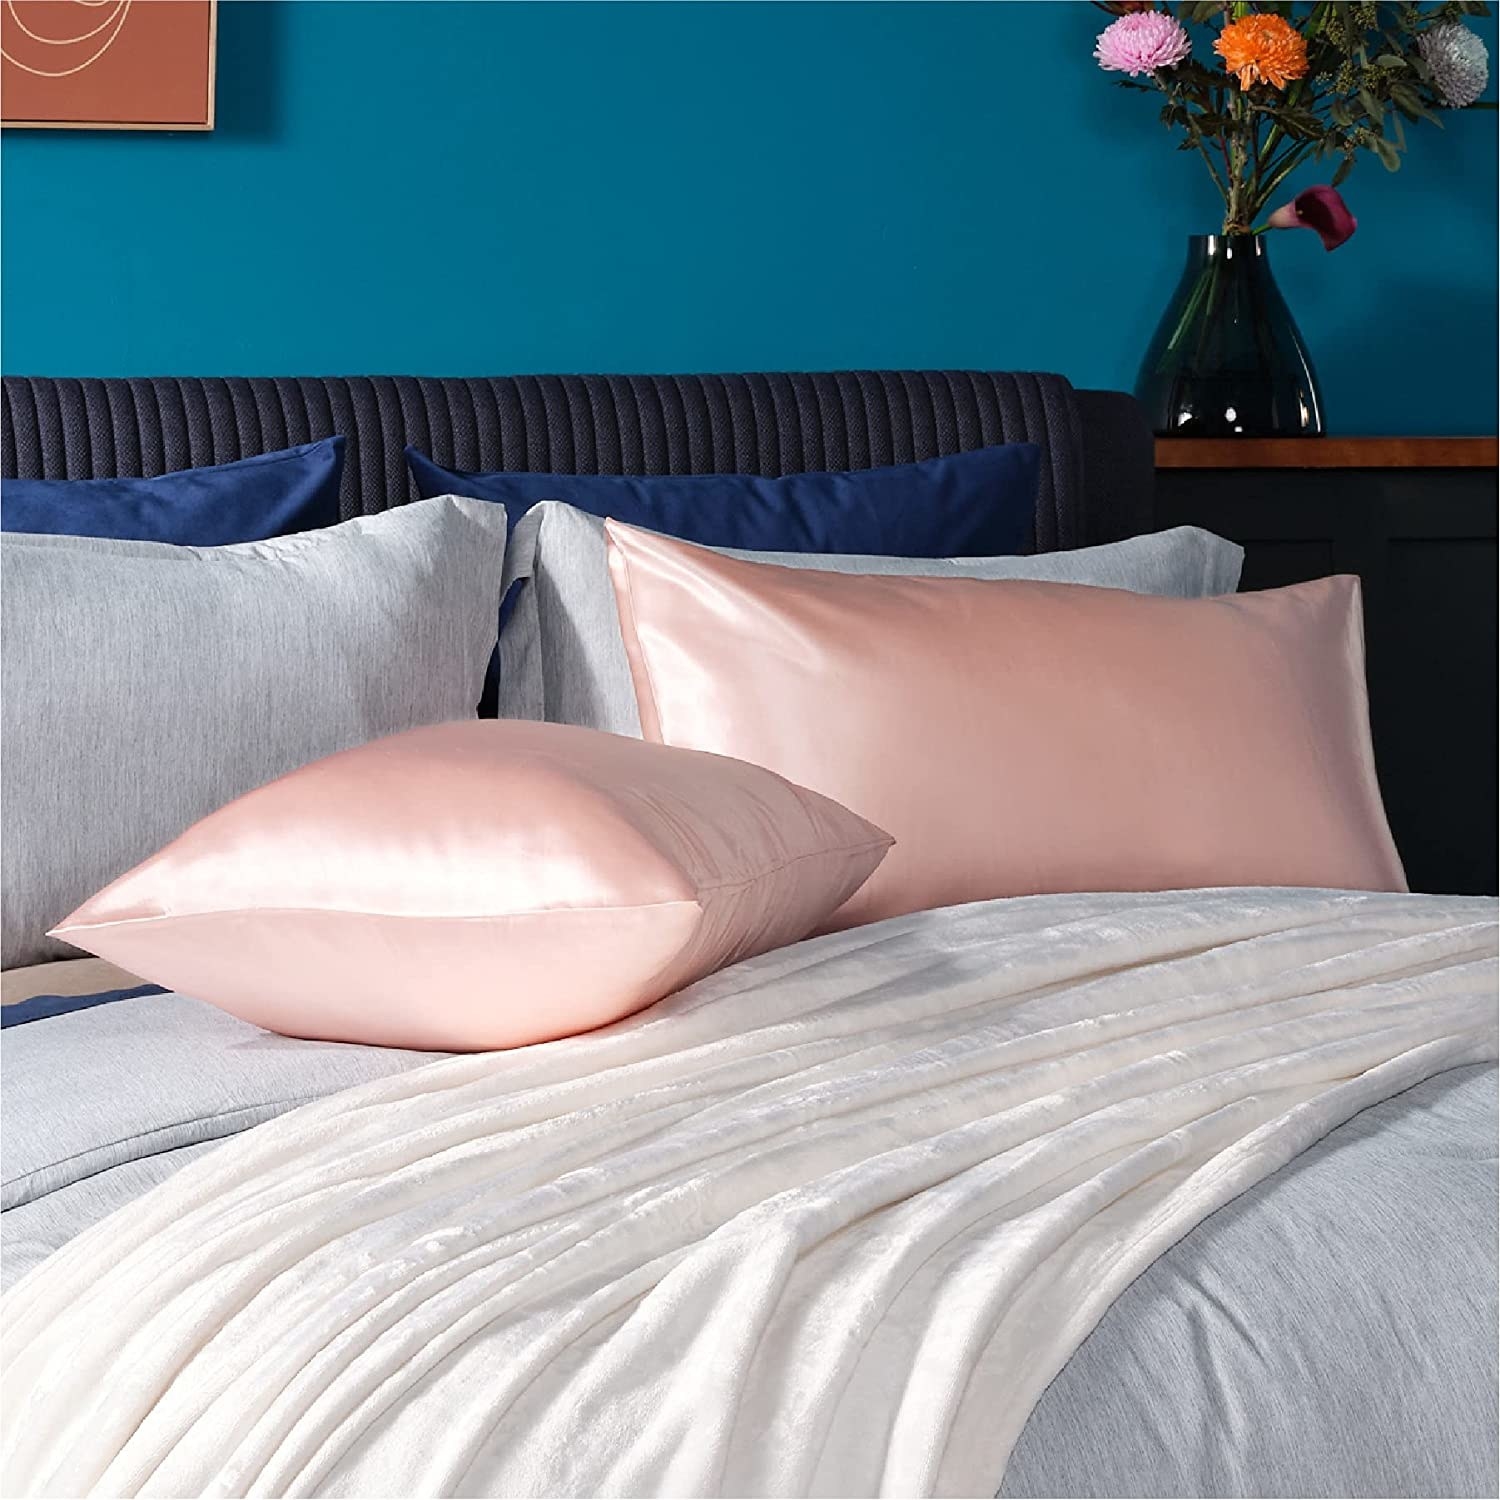 Two pillows in satin pillowcases on a bed